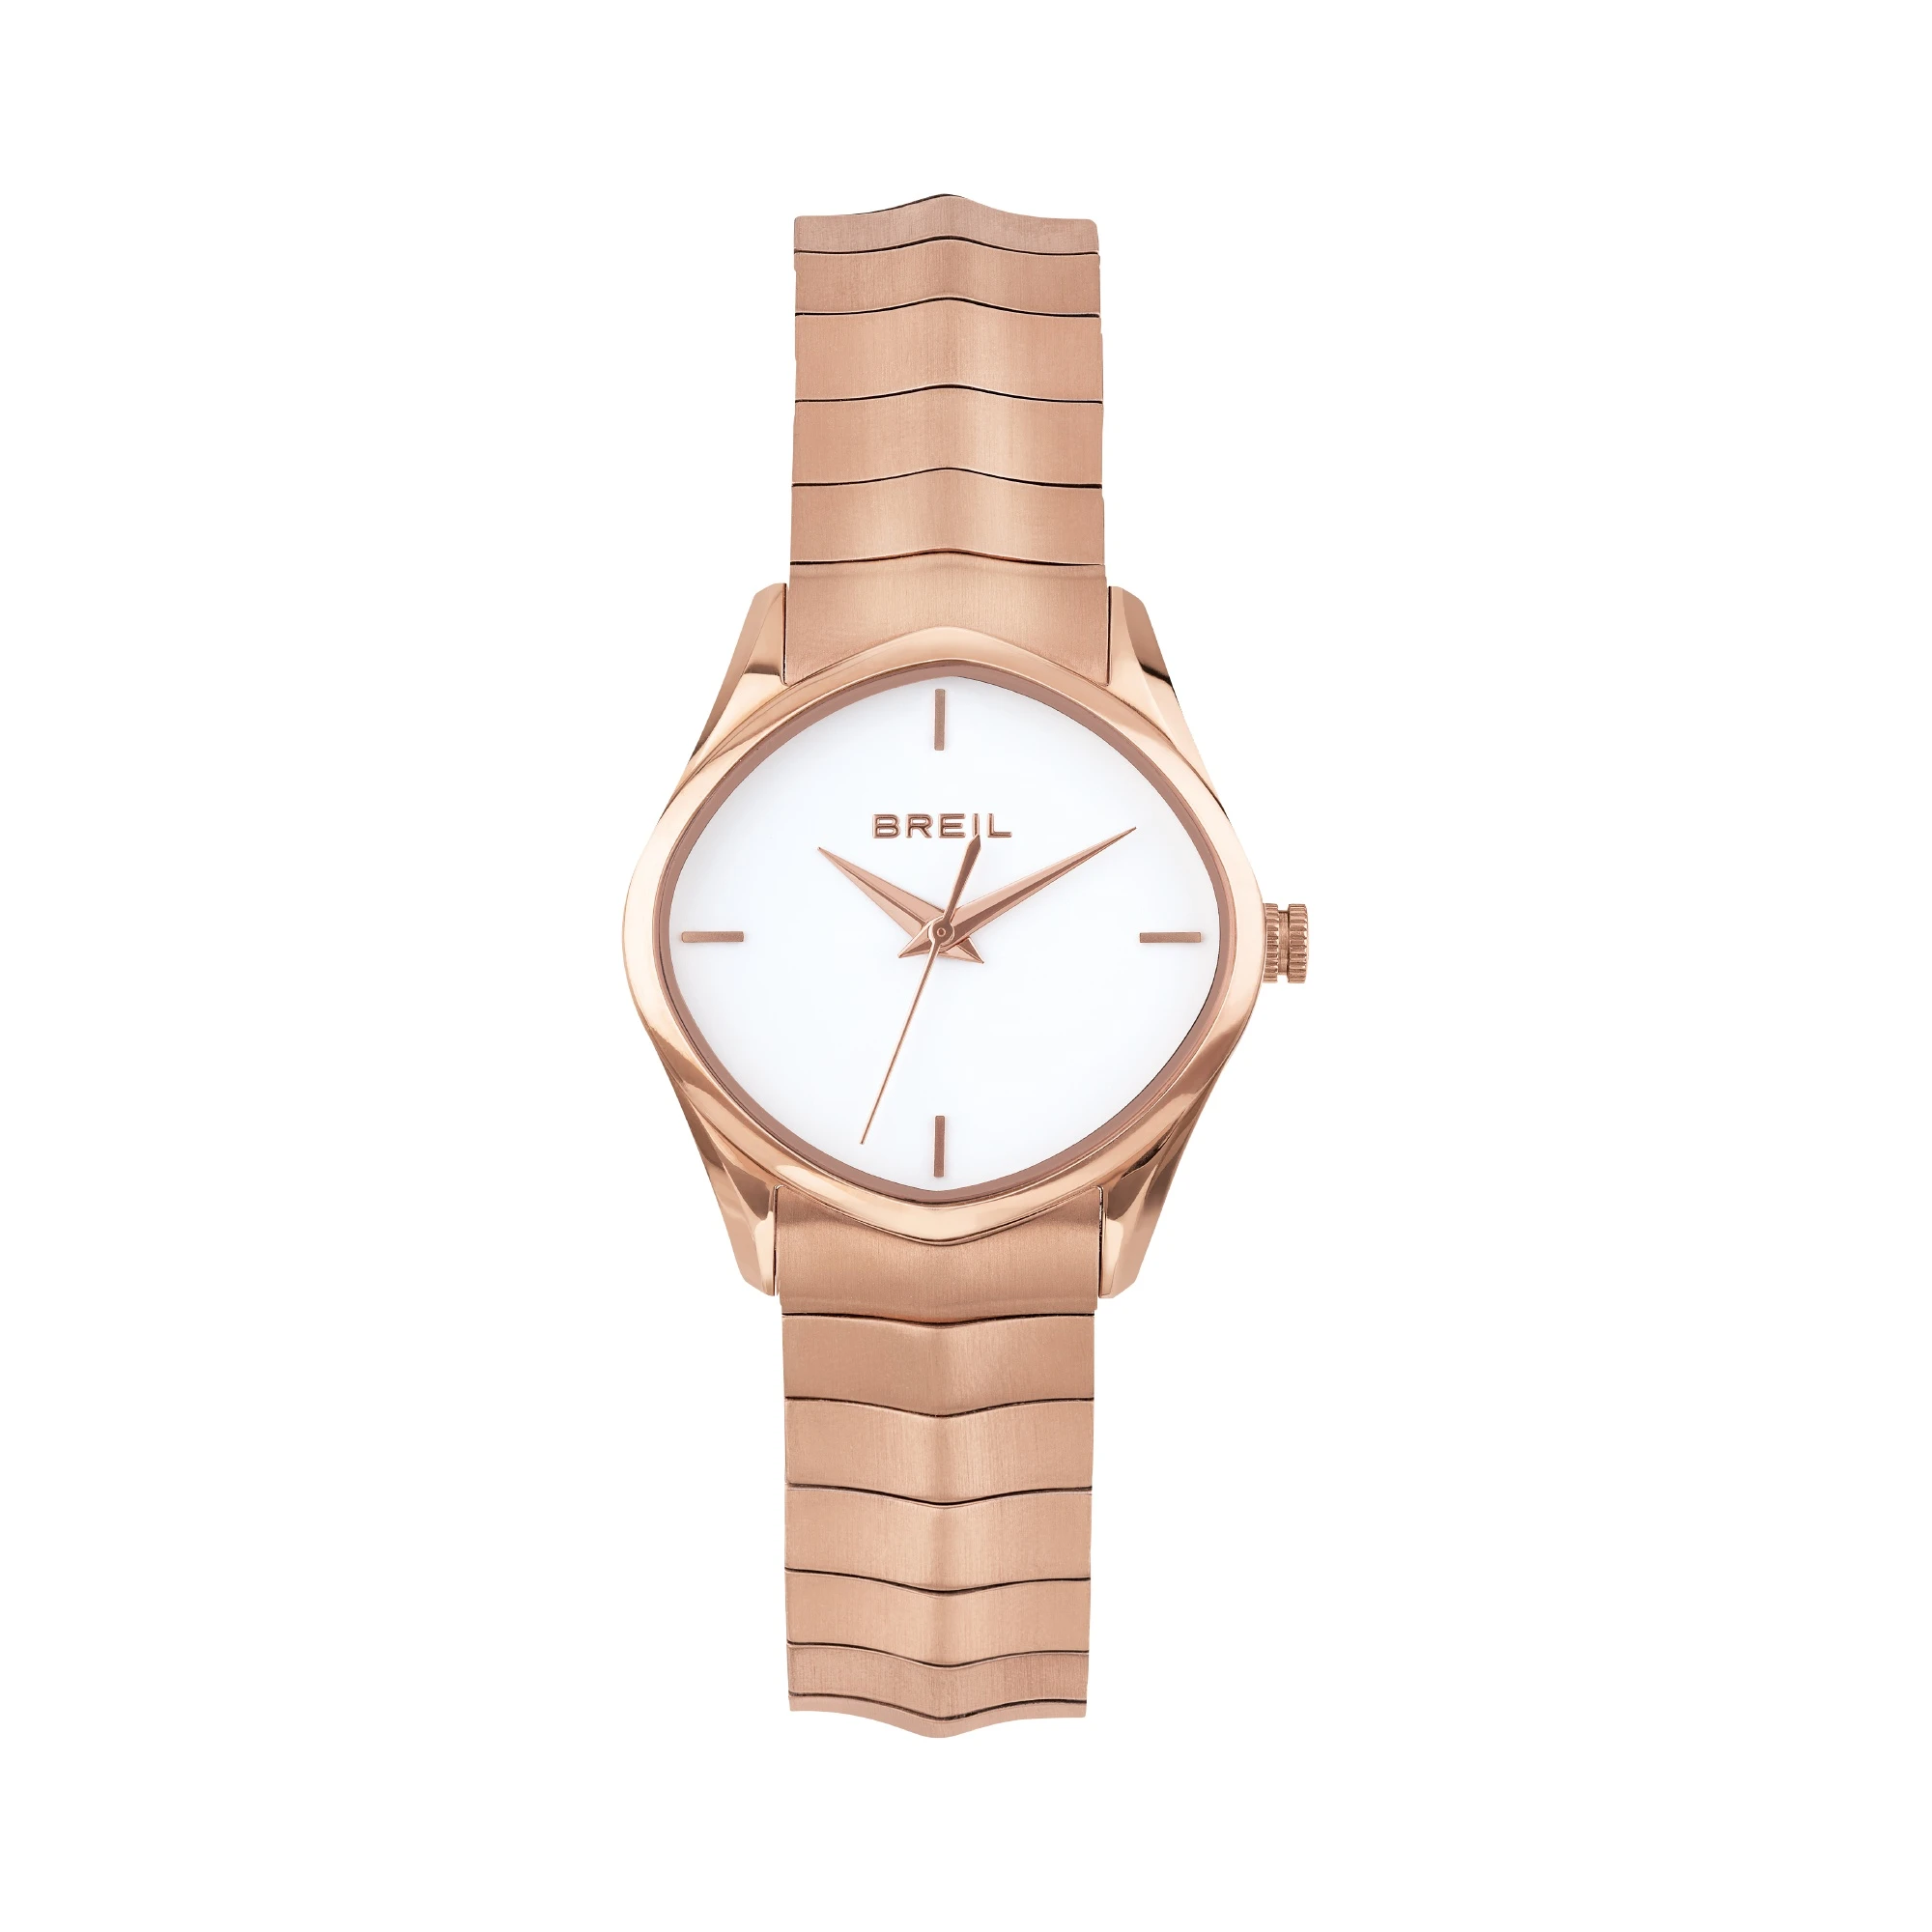 SINUOUS WATCHES - 3H LADY 32x30MM - 1 - TW1904 | Breil